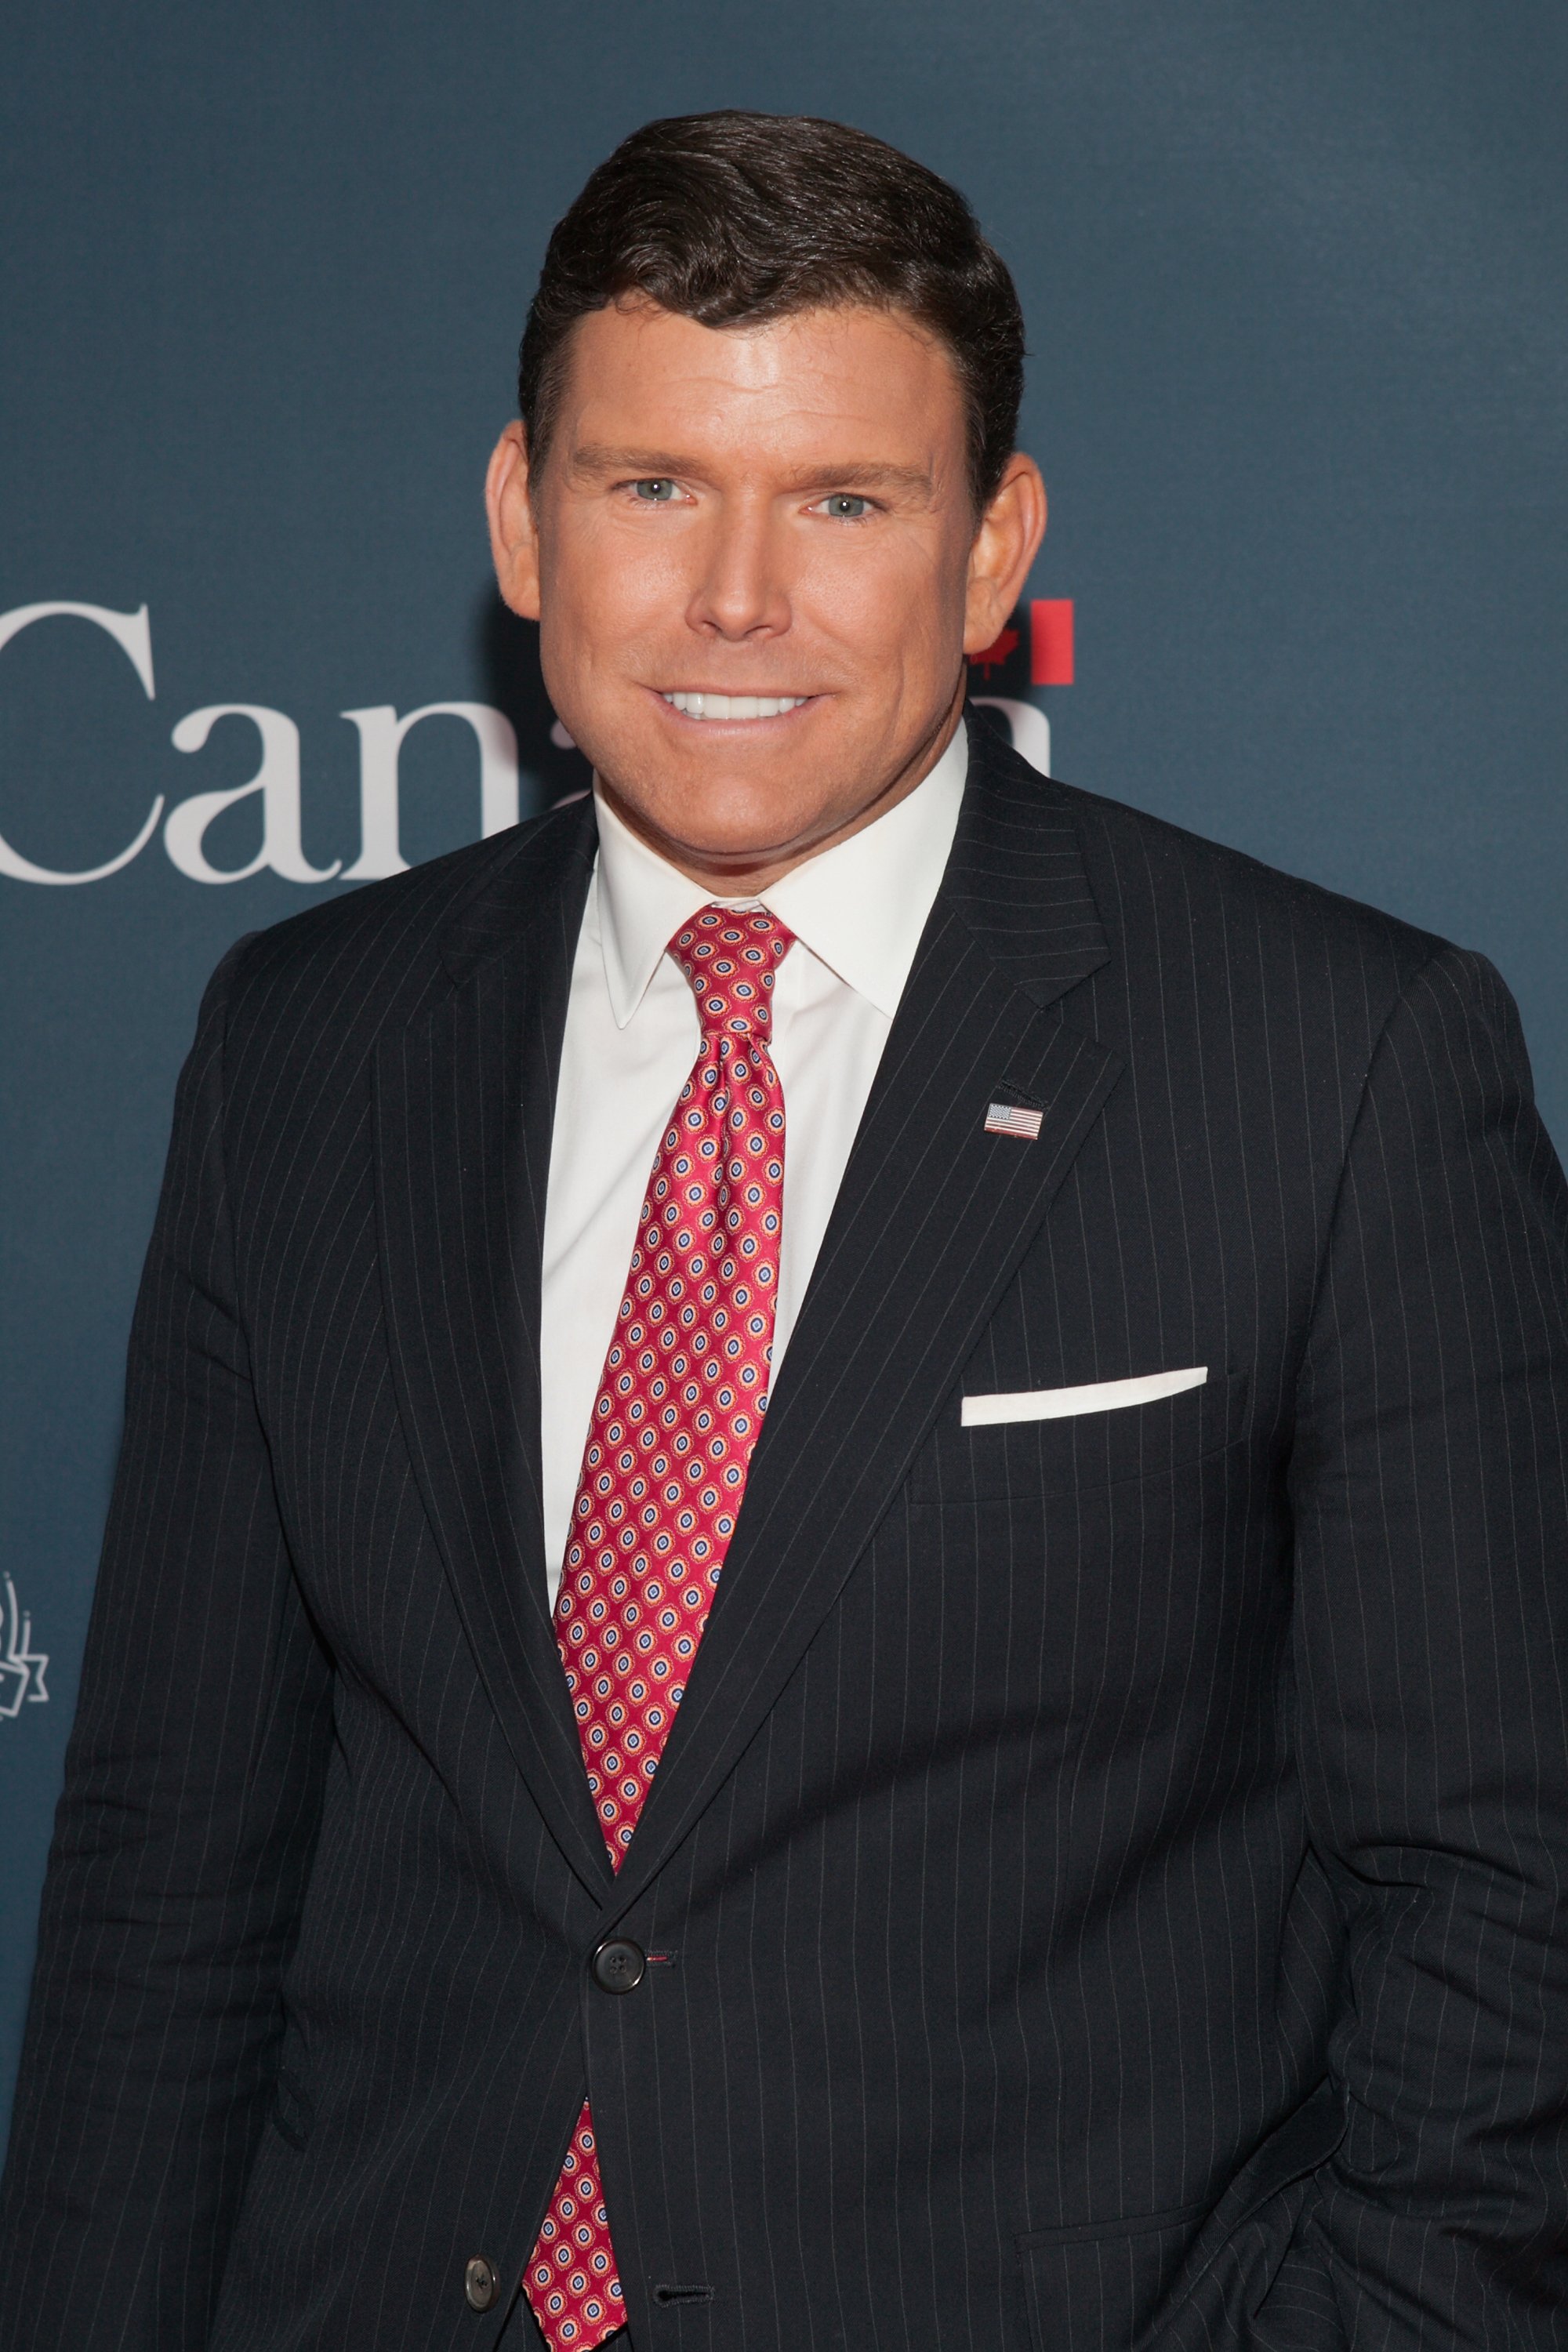  Bret Baier attends The Hill's and Entertainment Tonight's celebration of the 100th White House Correspondents' Association Dinner weekend on May 2, 2014 | Photo: Getty Images.